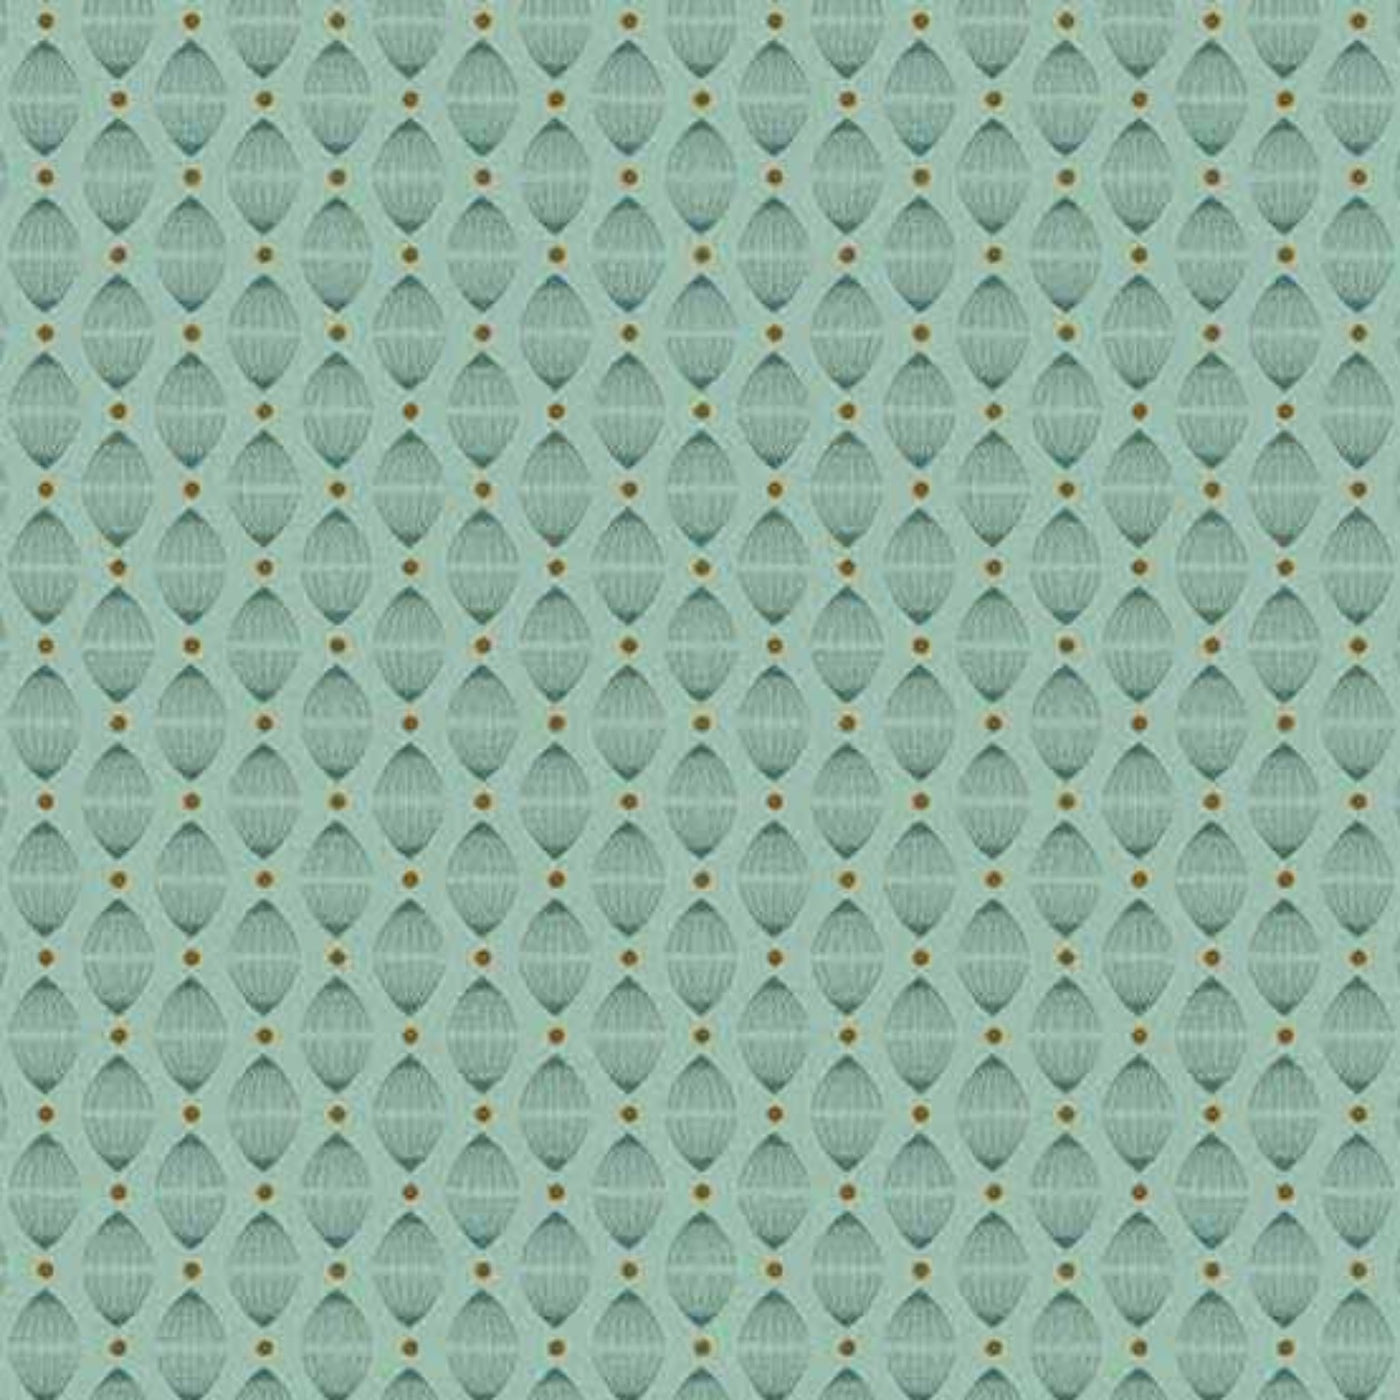 Primrose by Laundry Basket Quilts in Hoop in Cerulean A-534-T